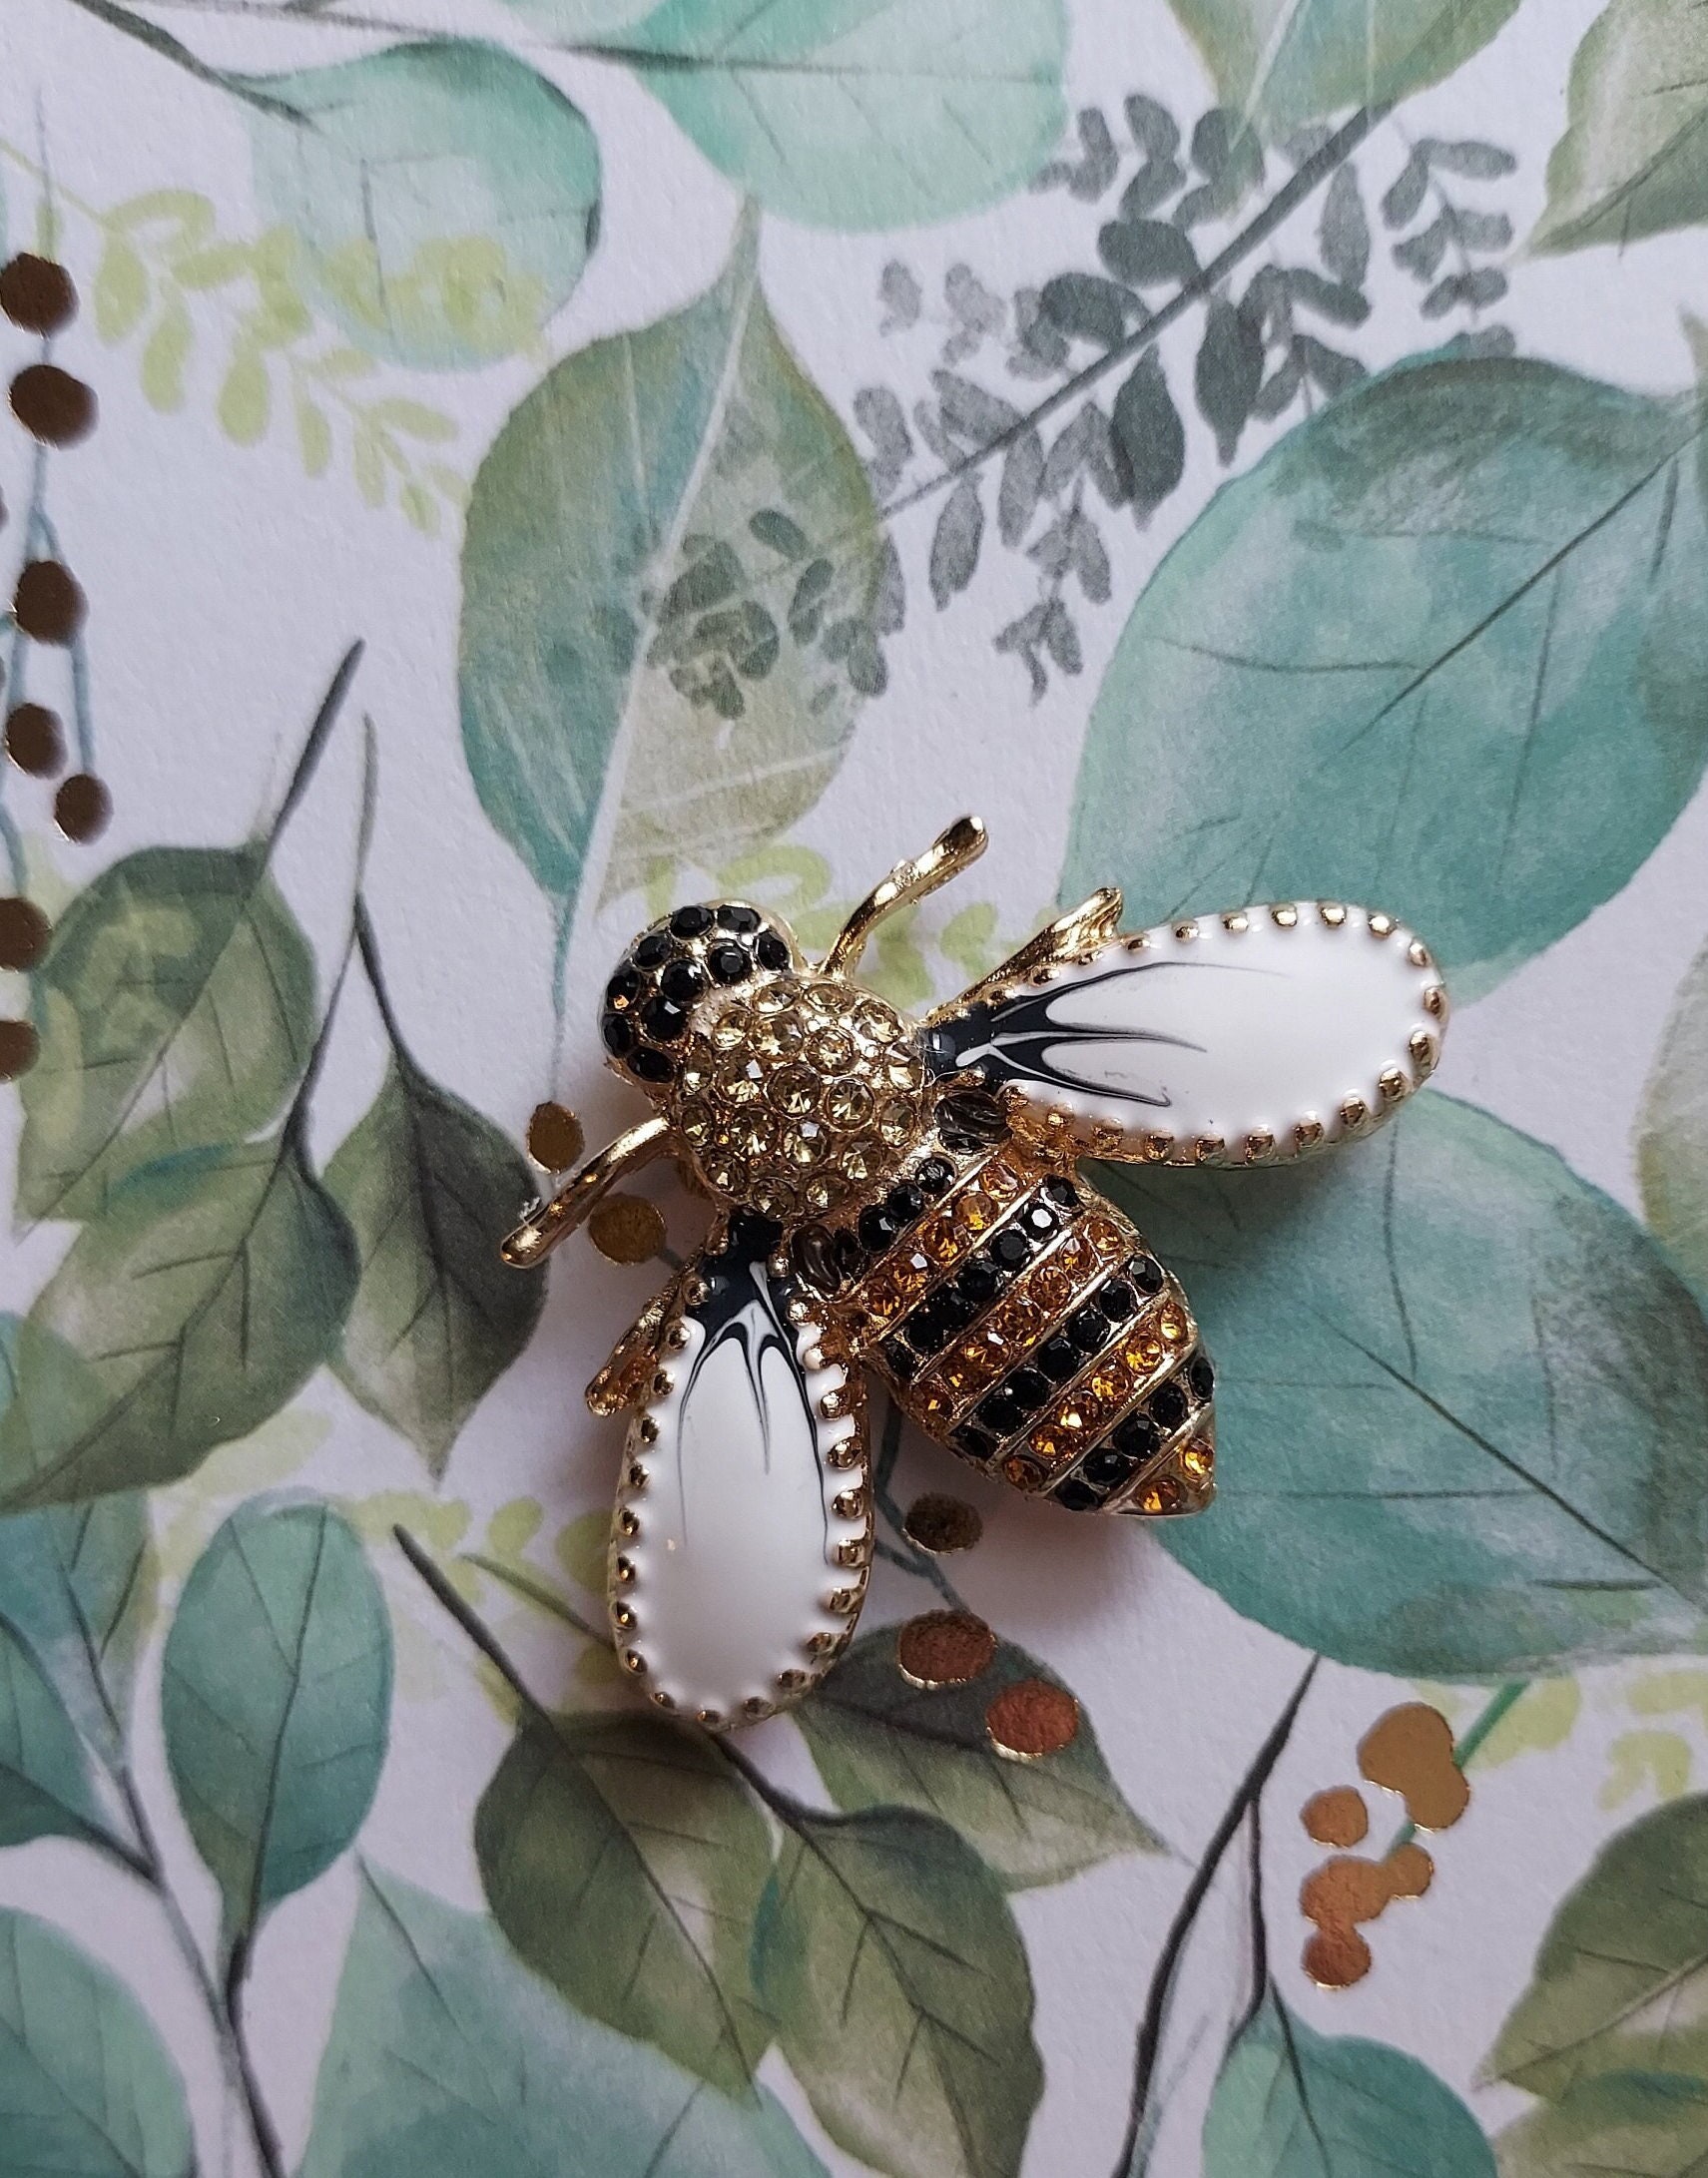  Gold Magnets Bumble Bee Decor Set of 6, Kitchen Magnets for  Refrigerator, Honey Bee Decor Bee Magnets Kitchen Gold Fridge Magnets Cute  Bee Gifts, Strong Magnets for Refrigerator, Whiteboard : Home